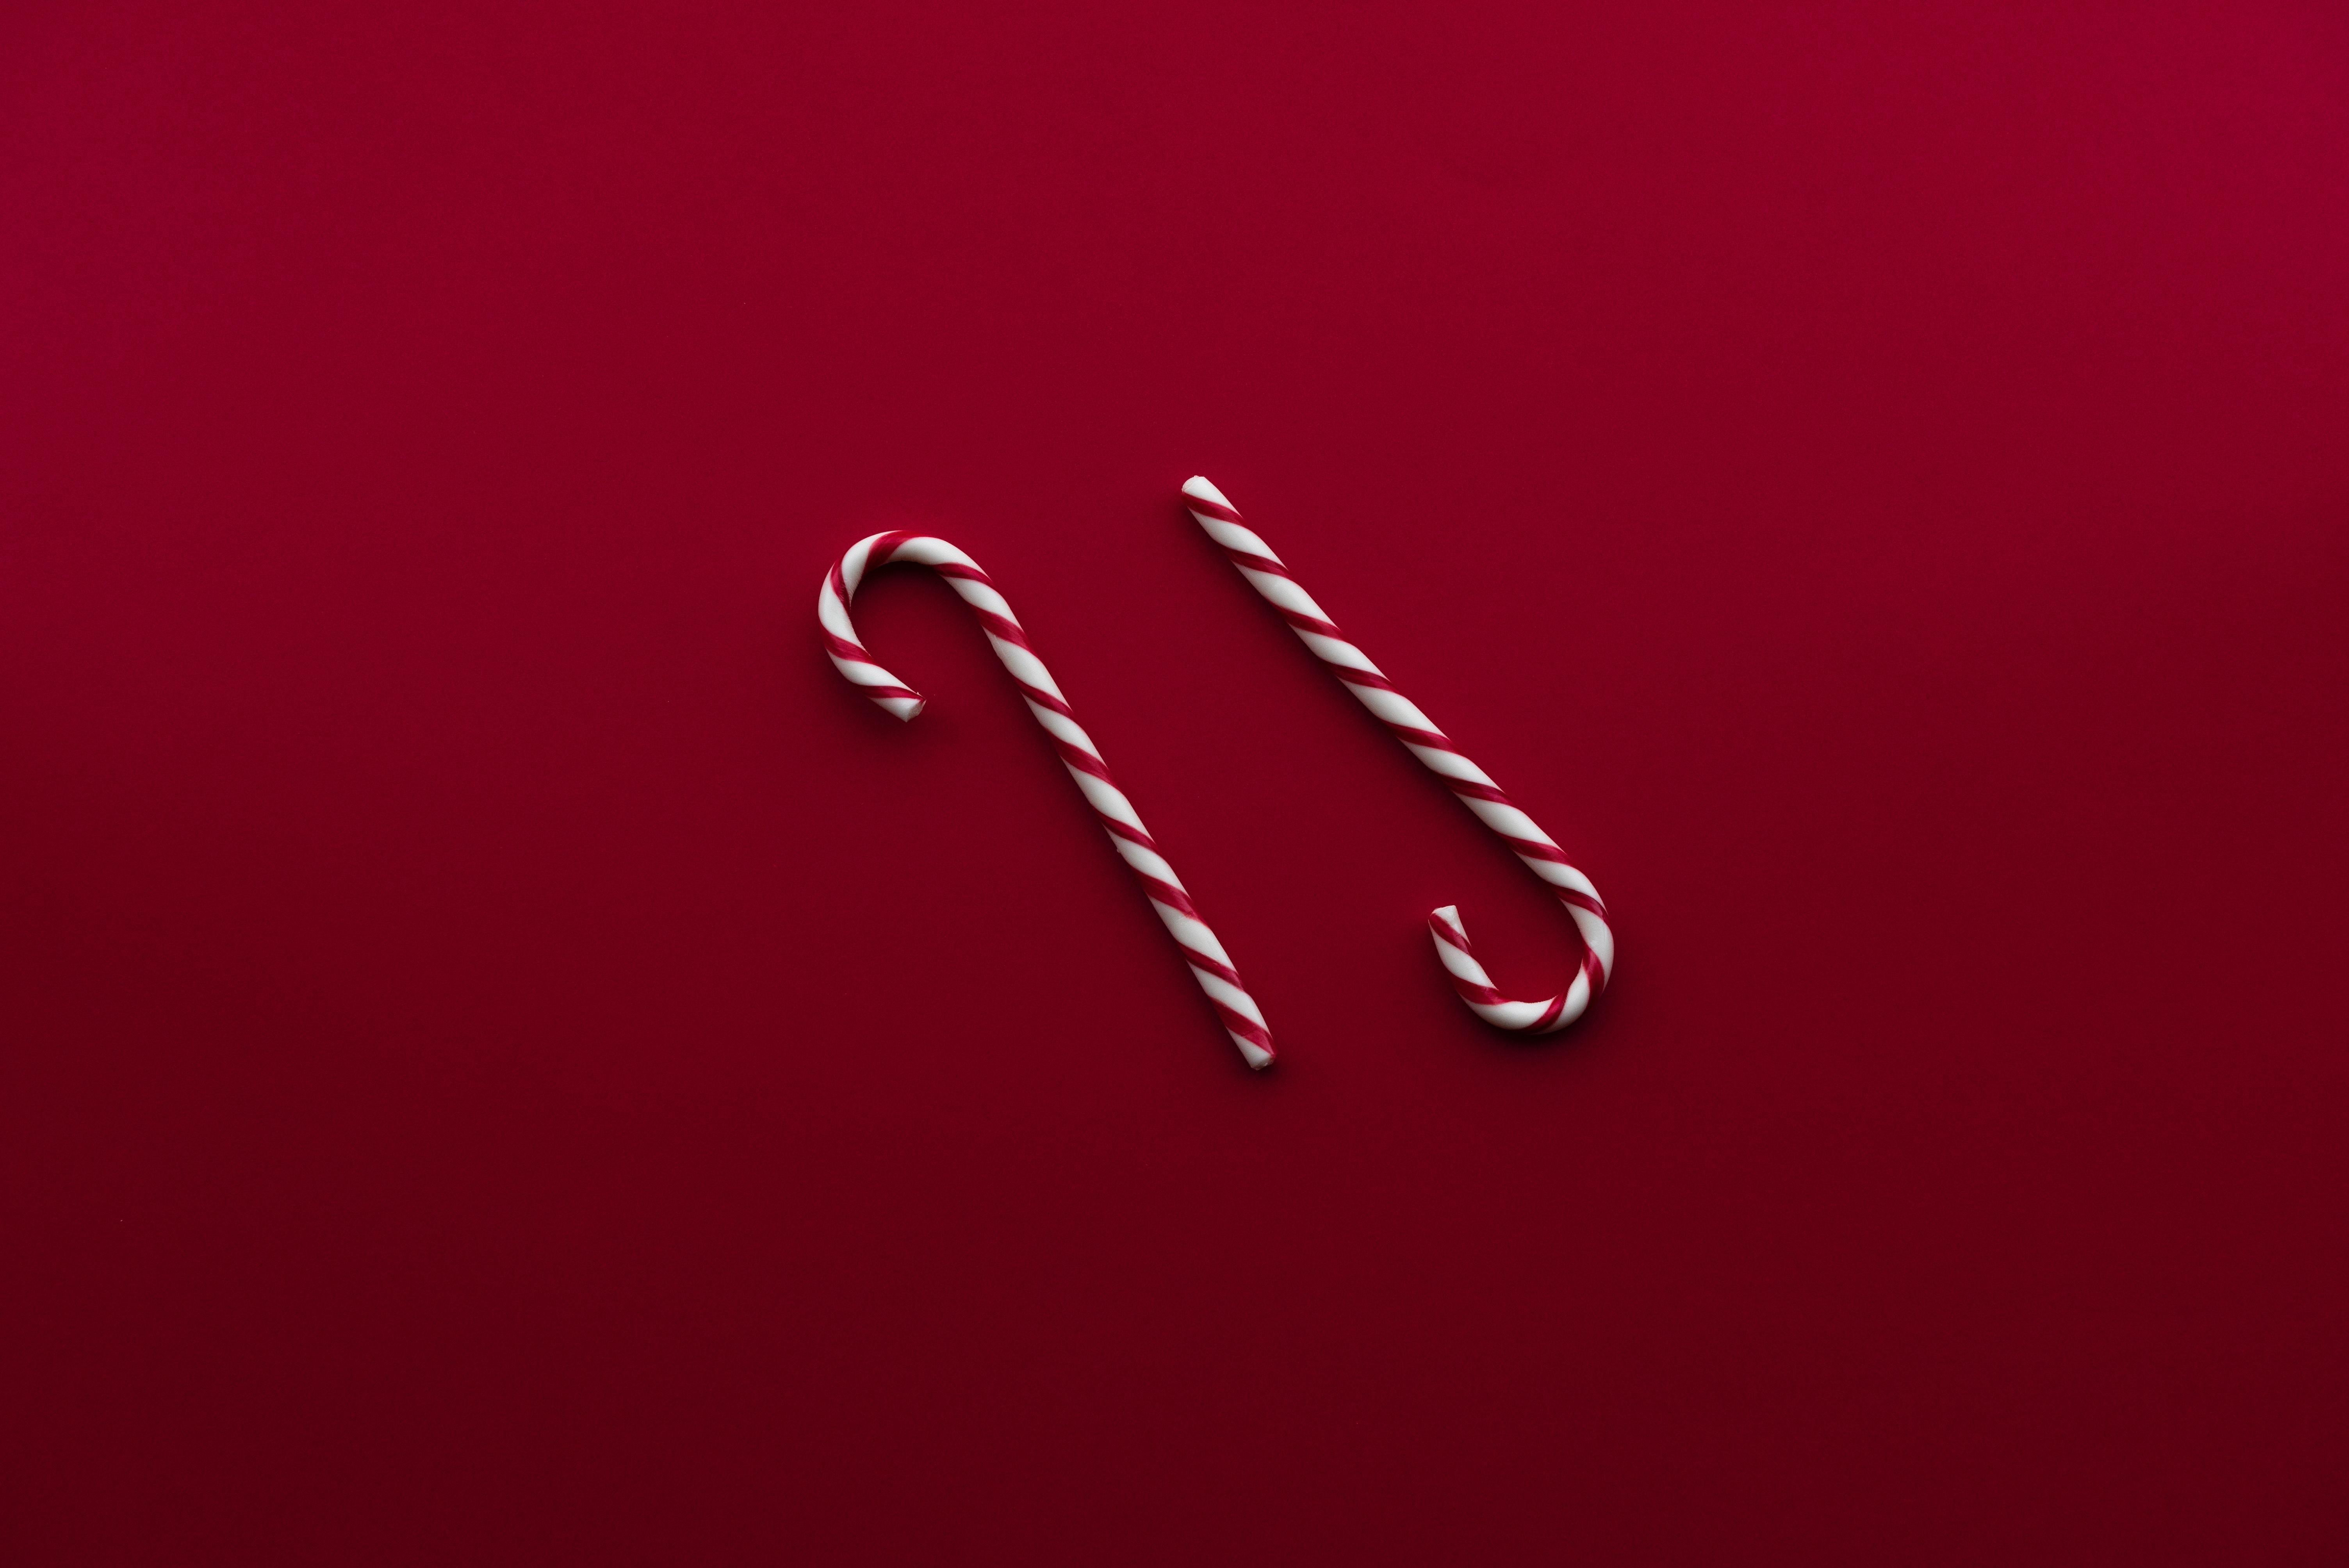 6016x4016 #red, #food, #type, #red and white, #sweet